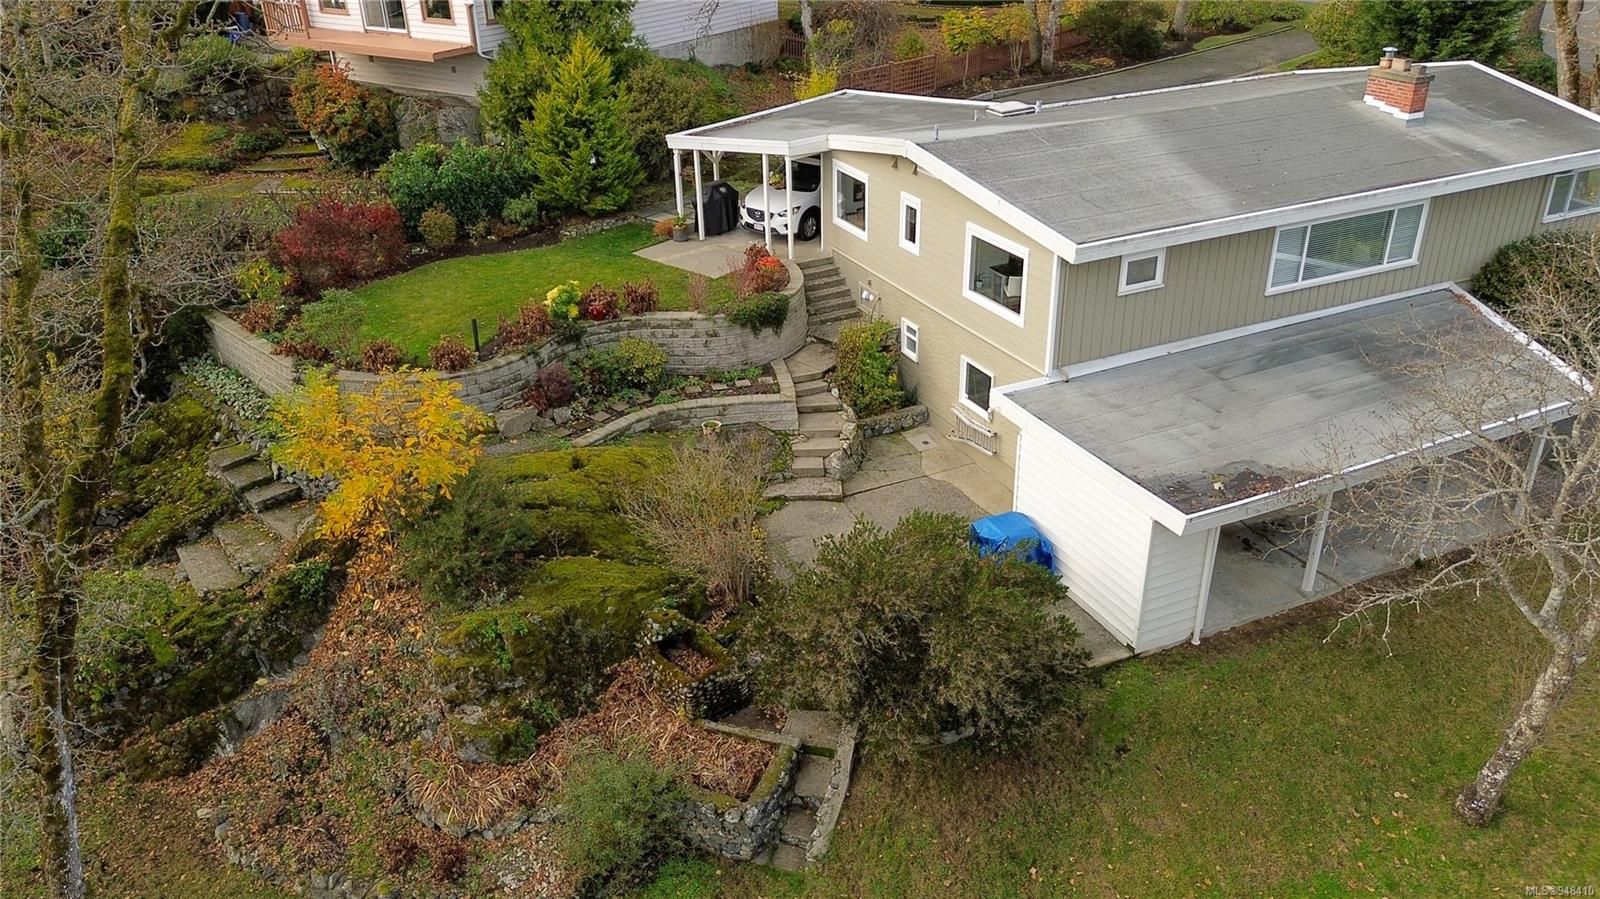 We have sold a property at 1249 Tattersall Dr in Saanich